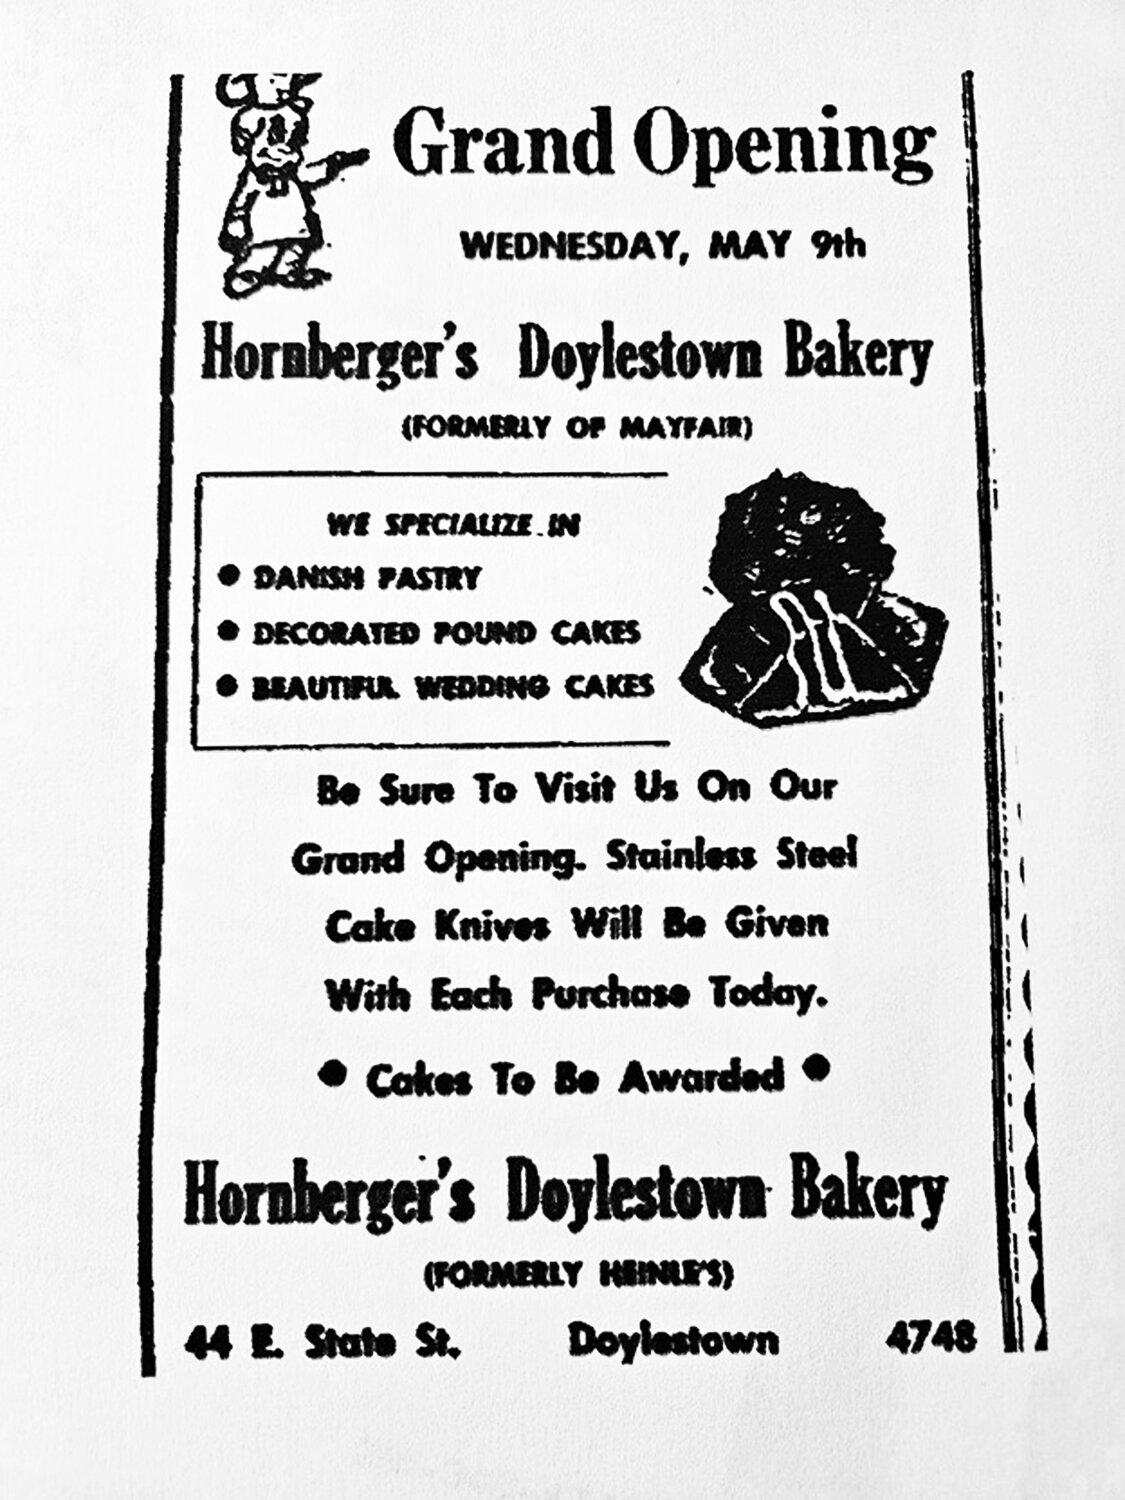 Announcement in the May 9, 1956 edition of The Daily Intelligencer.